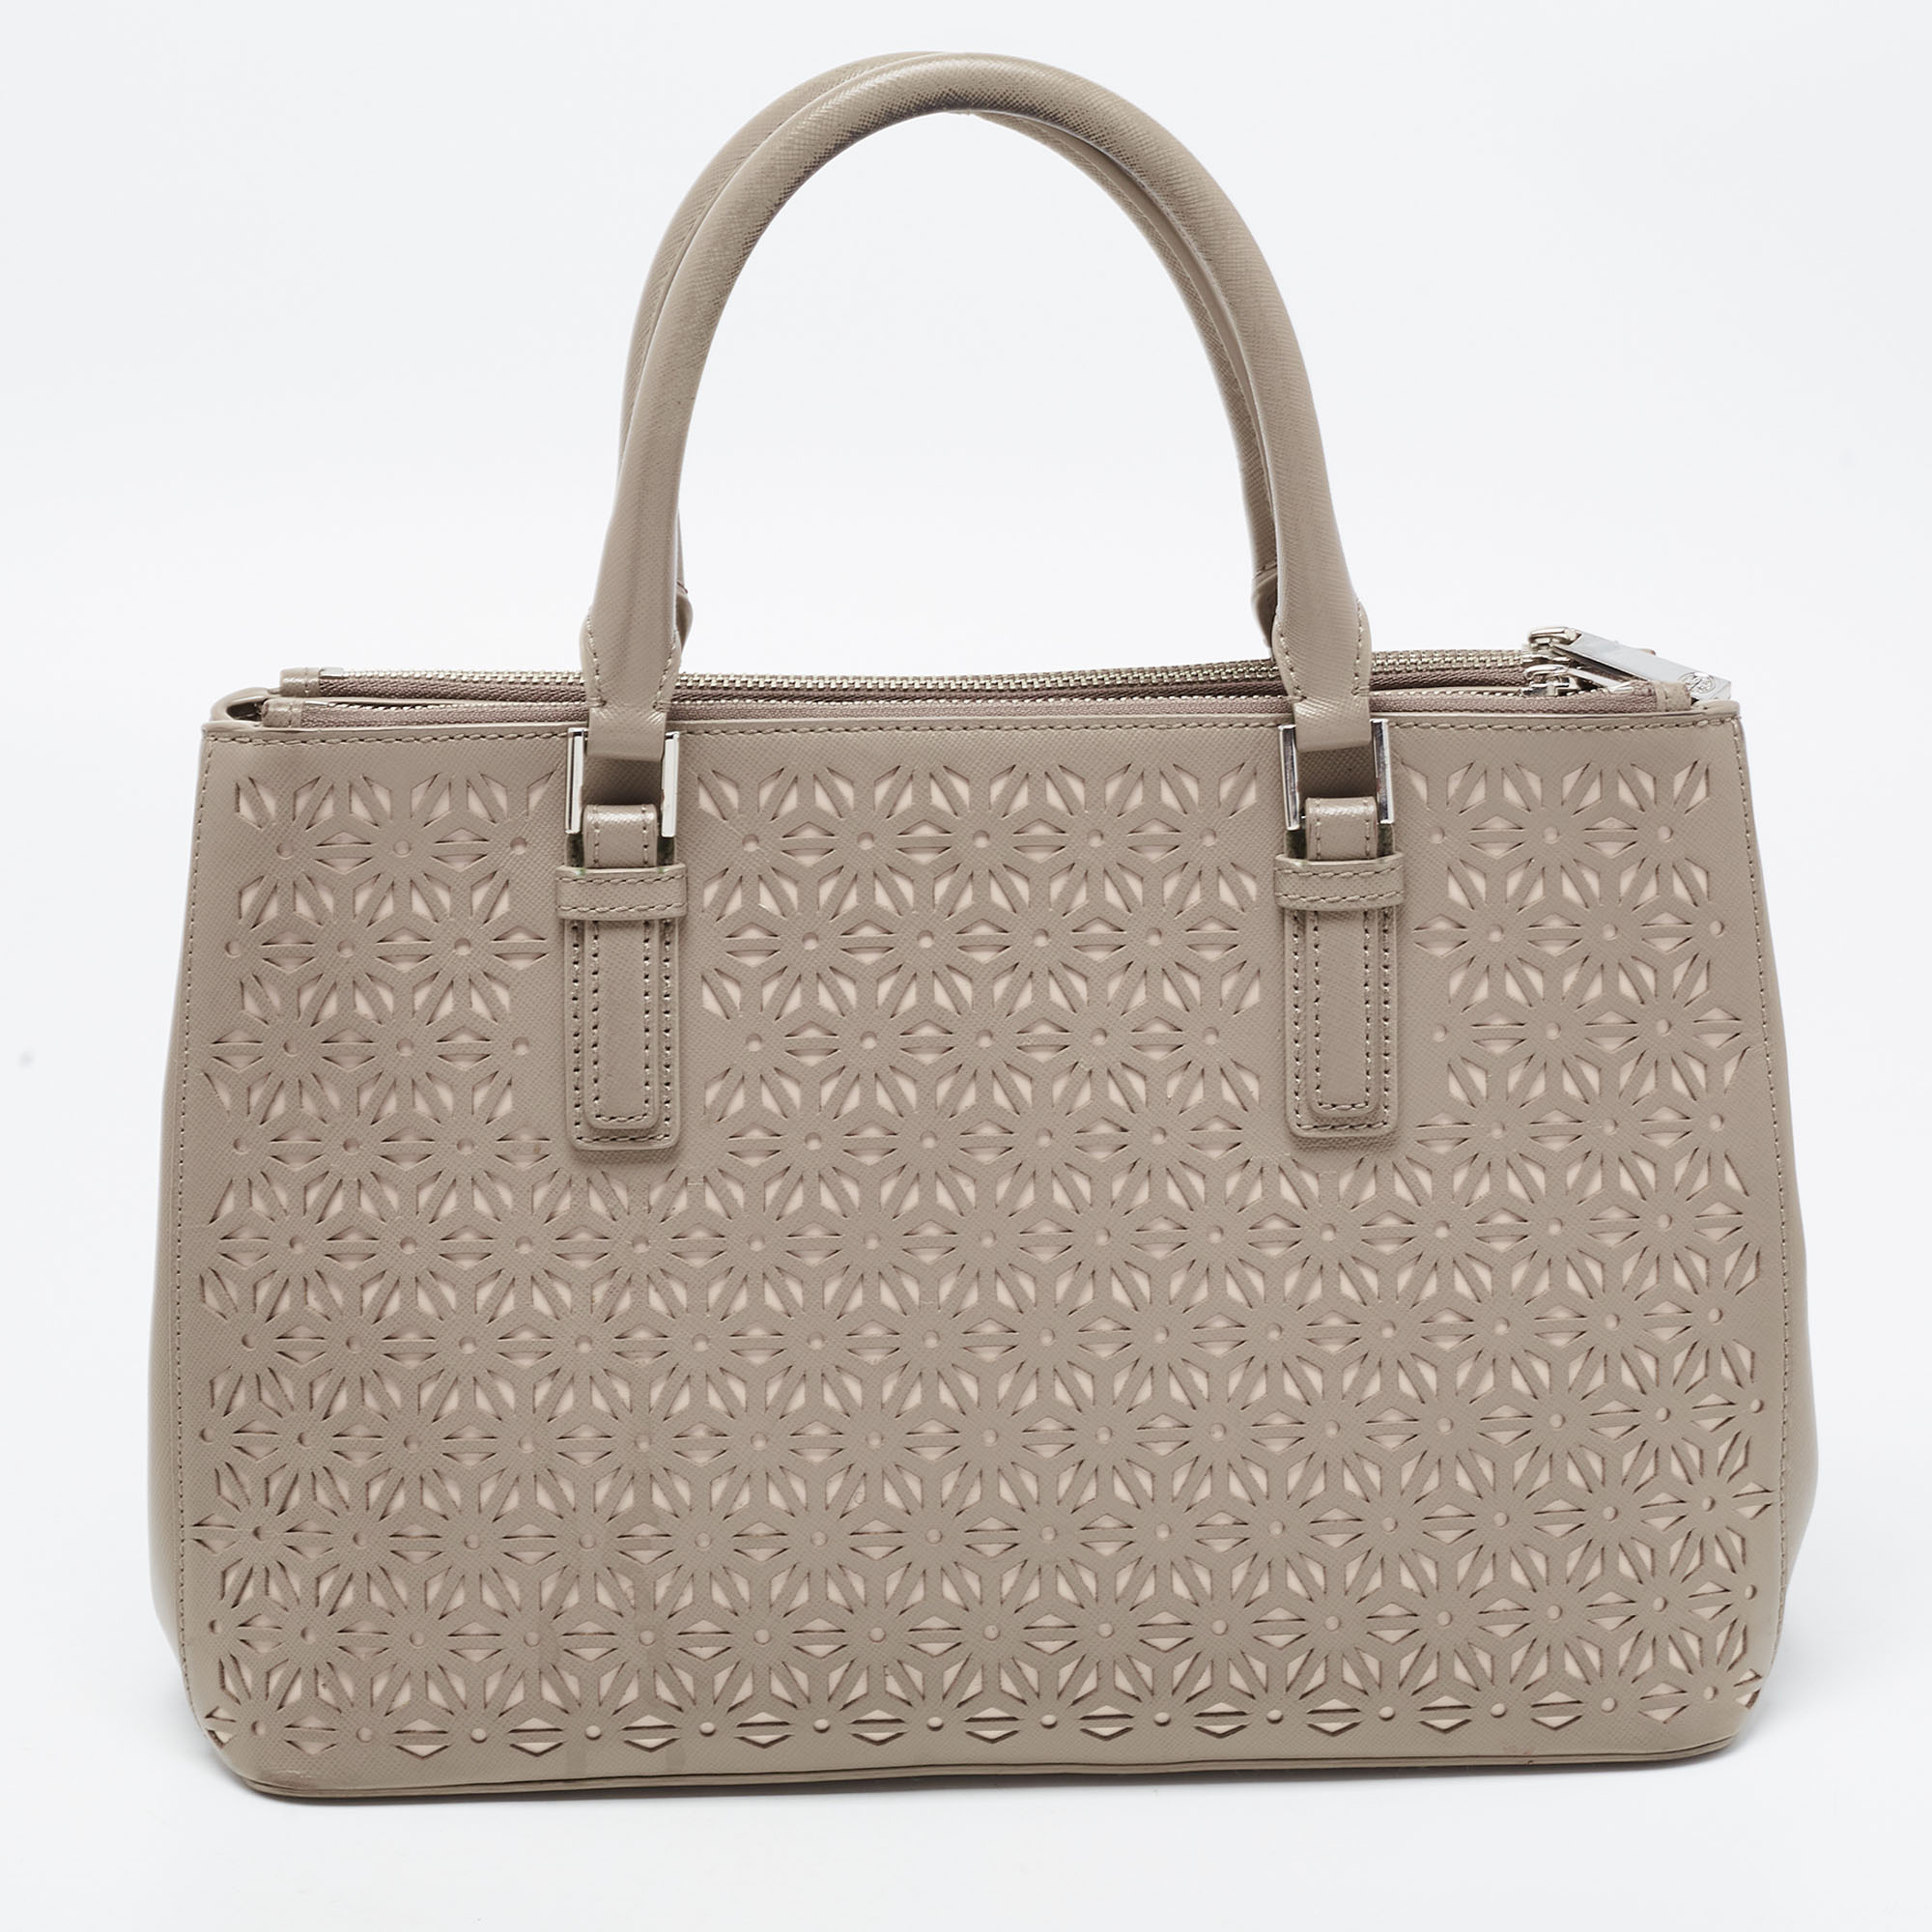 Tory Burch Grey Floral Laser Cut Leather Double Zip Robinson Tote